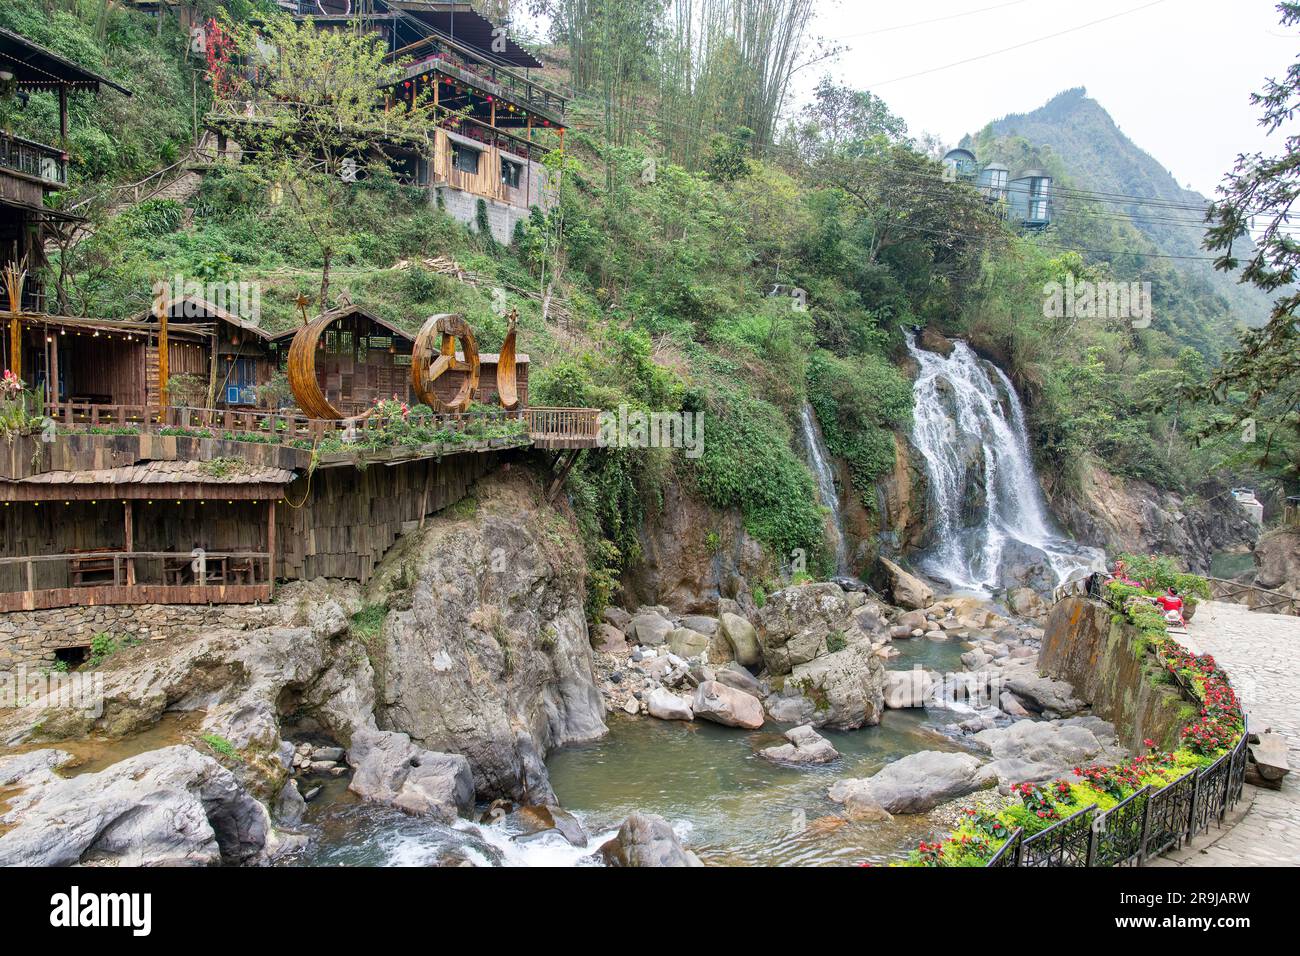 Cat Cat Village, Sapa, Vietnam-April 2023; River and waterfall in the traditional village of Cat Cat known for its Water wheels for power generation a Stock Photo